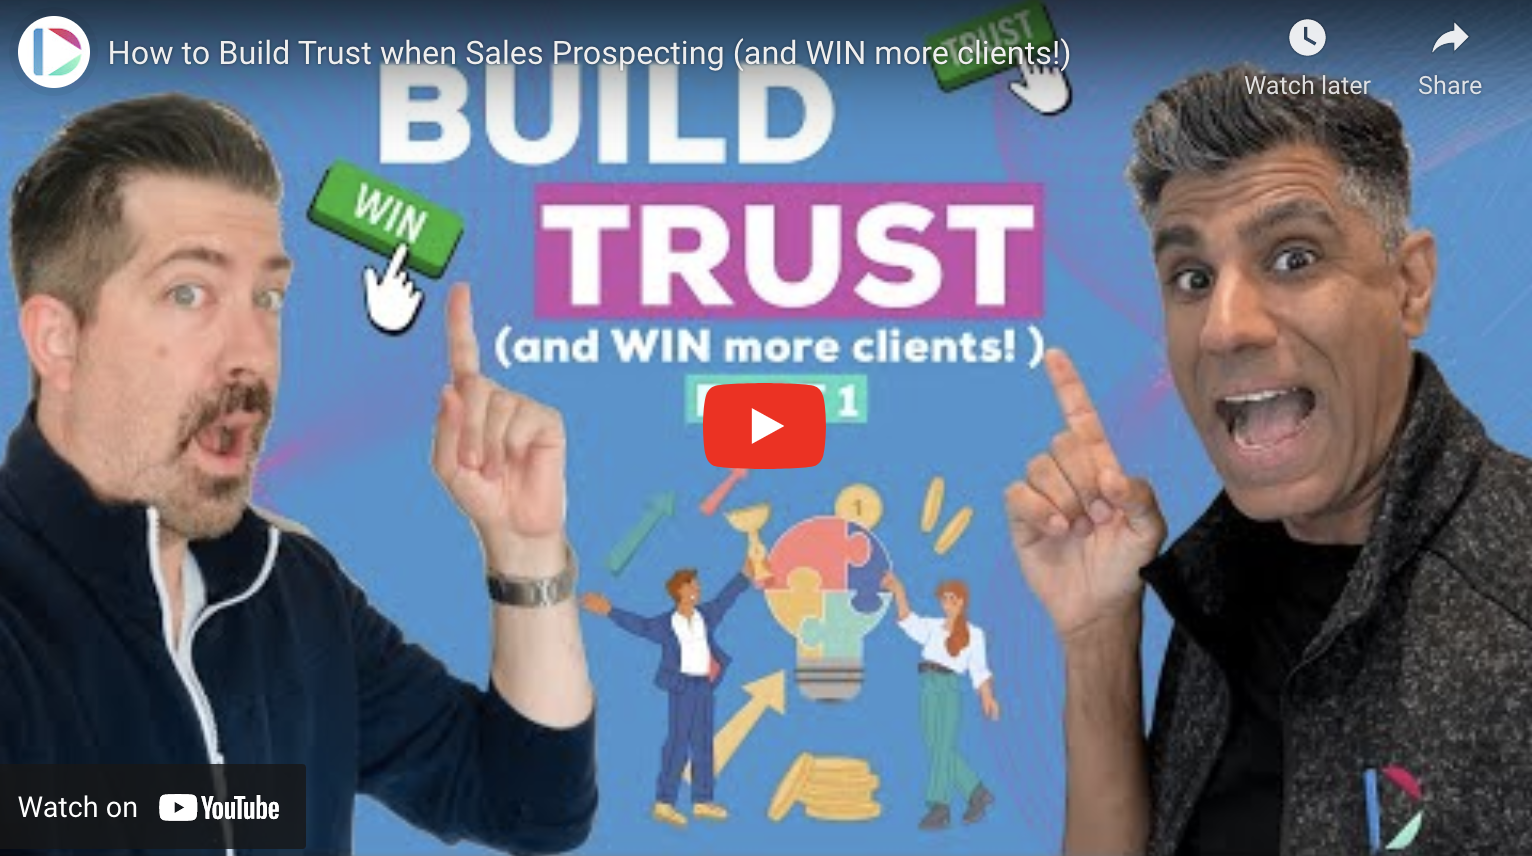 How to Build Trust when Sales Prospecting (and WIN more clients!)